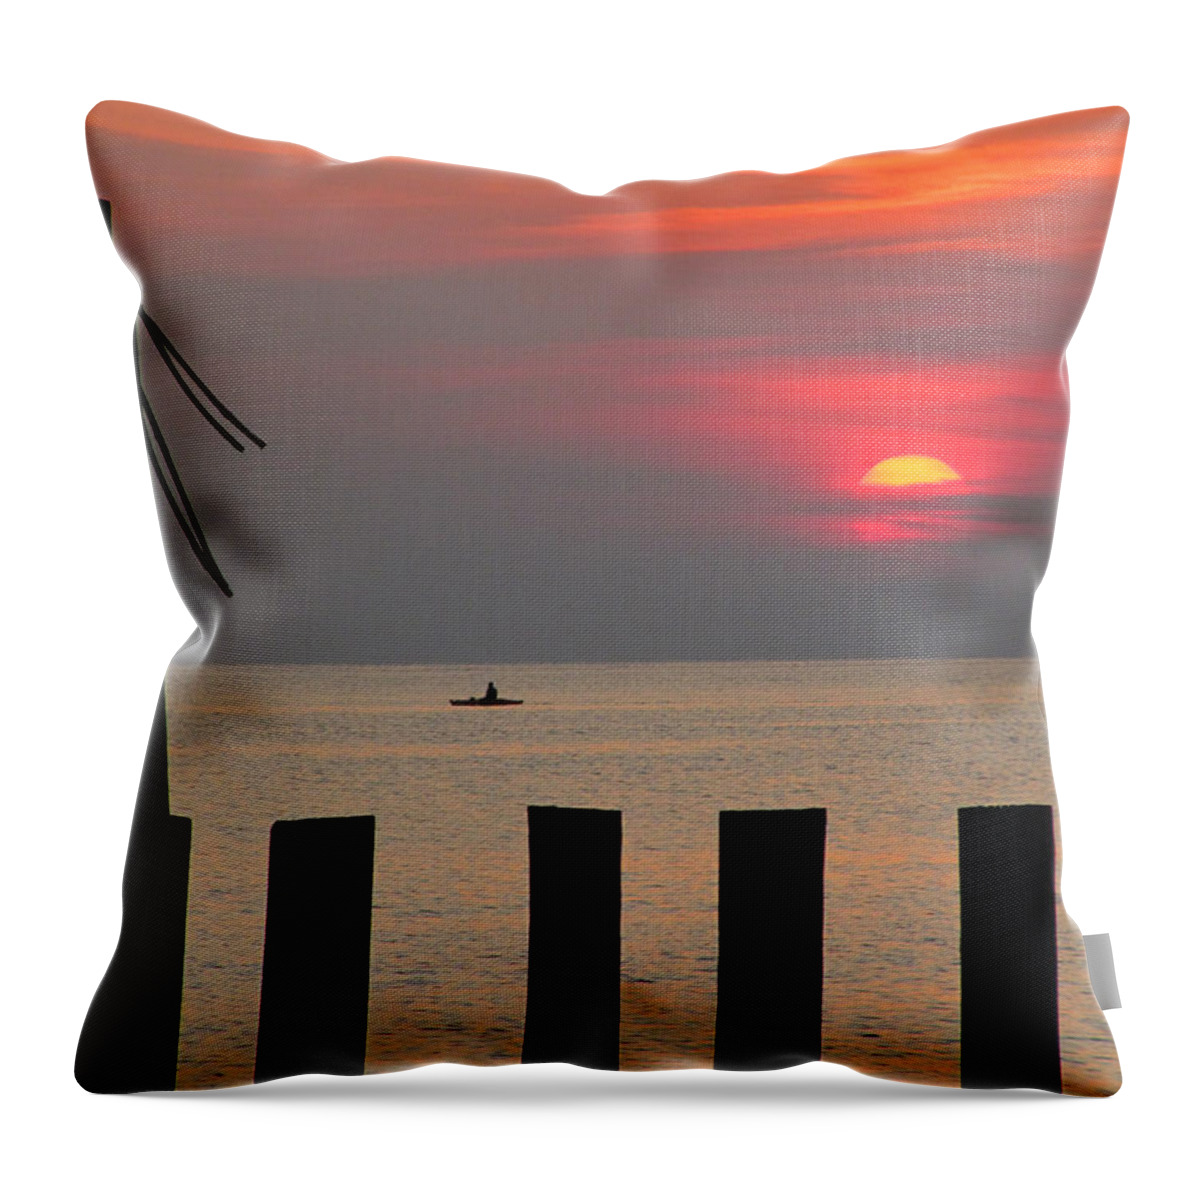 Sunset Throw Pillow featuring the photograph Another Sunset by Richard Reeve